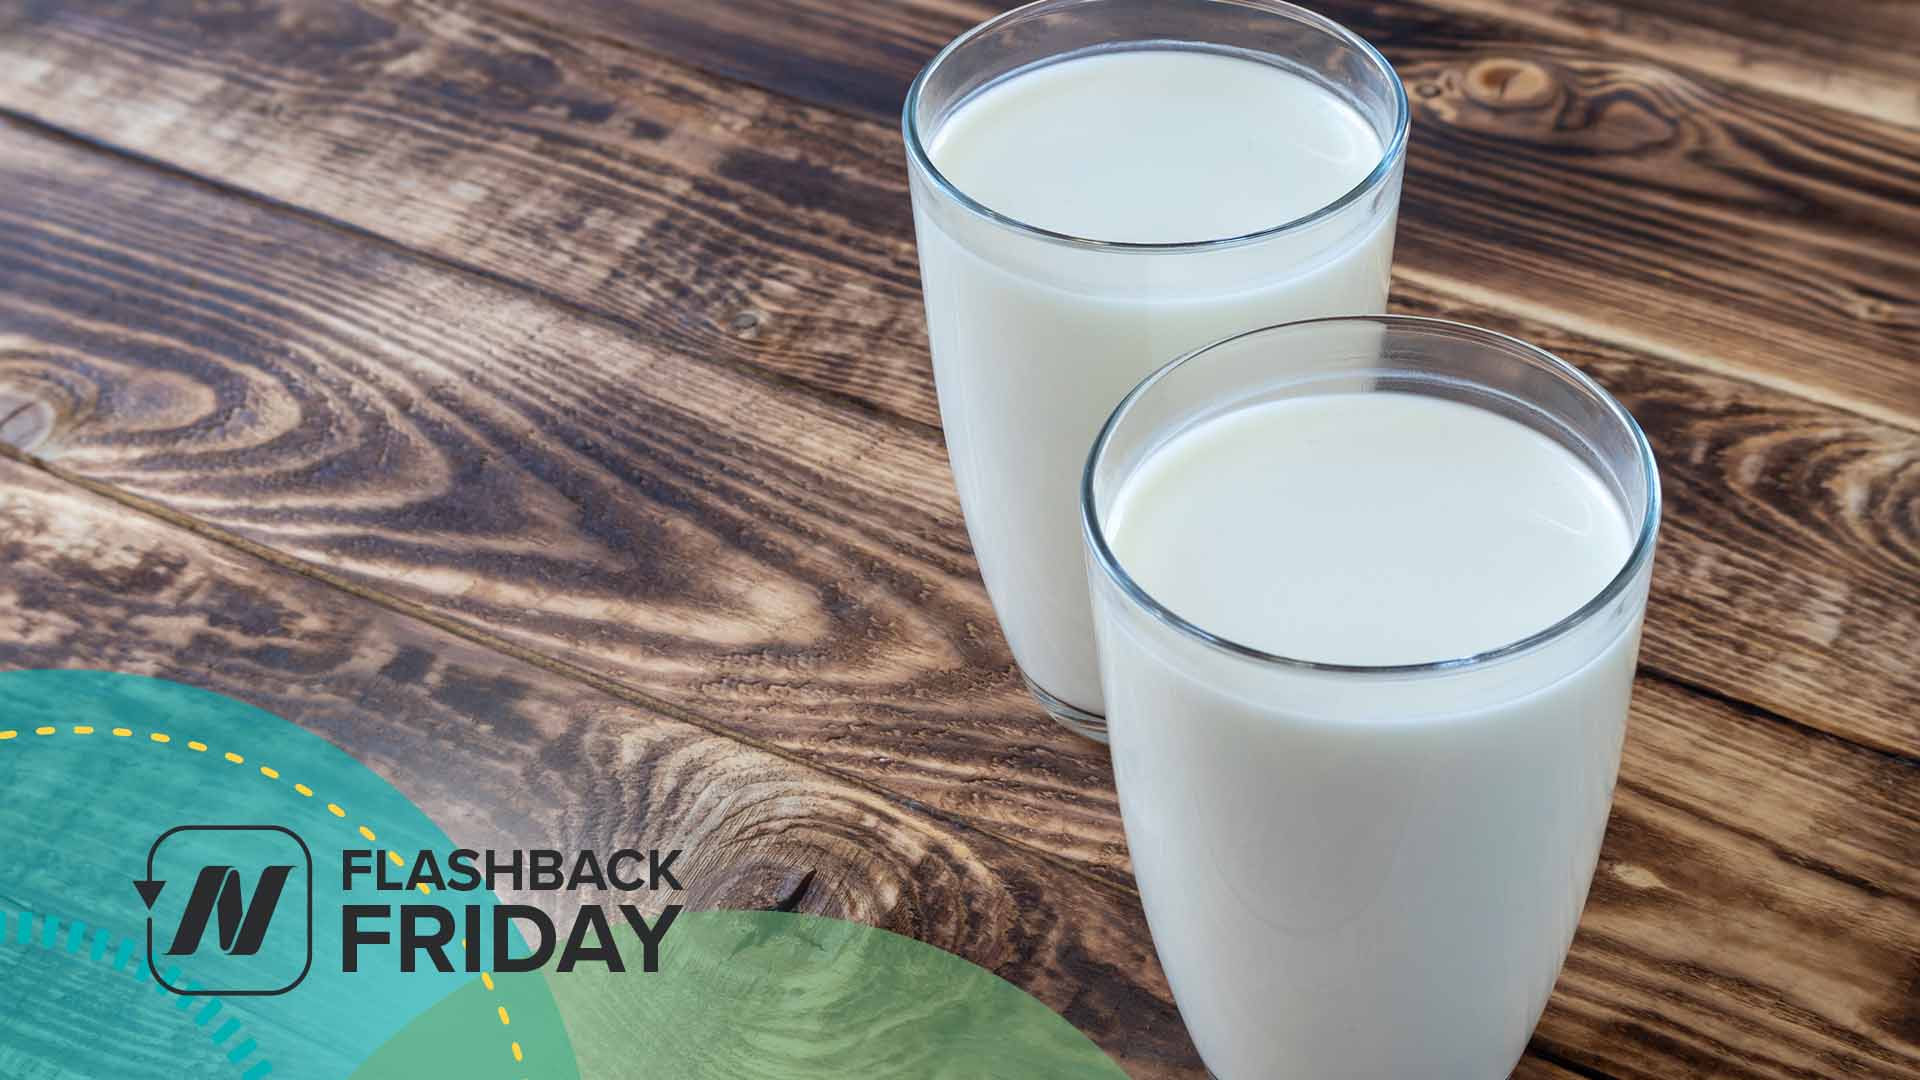 Son Fotce To Drink Mom Milk - Flashback Friday: Childhood Constipation and Cow's Milk